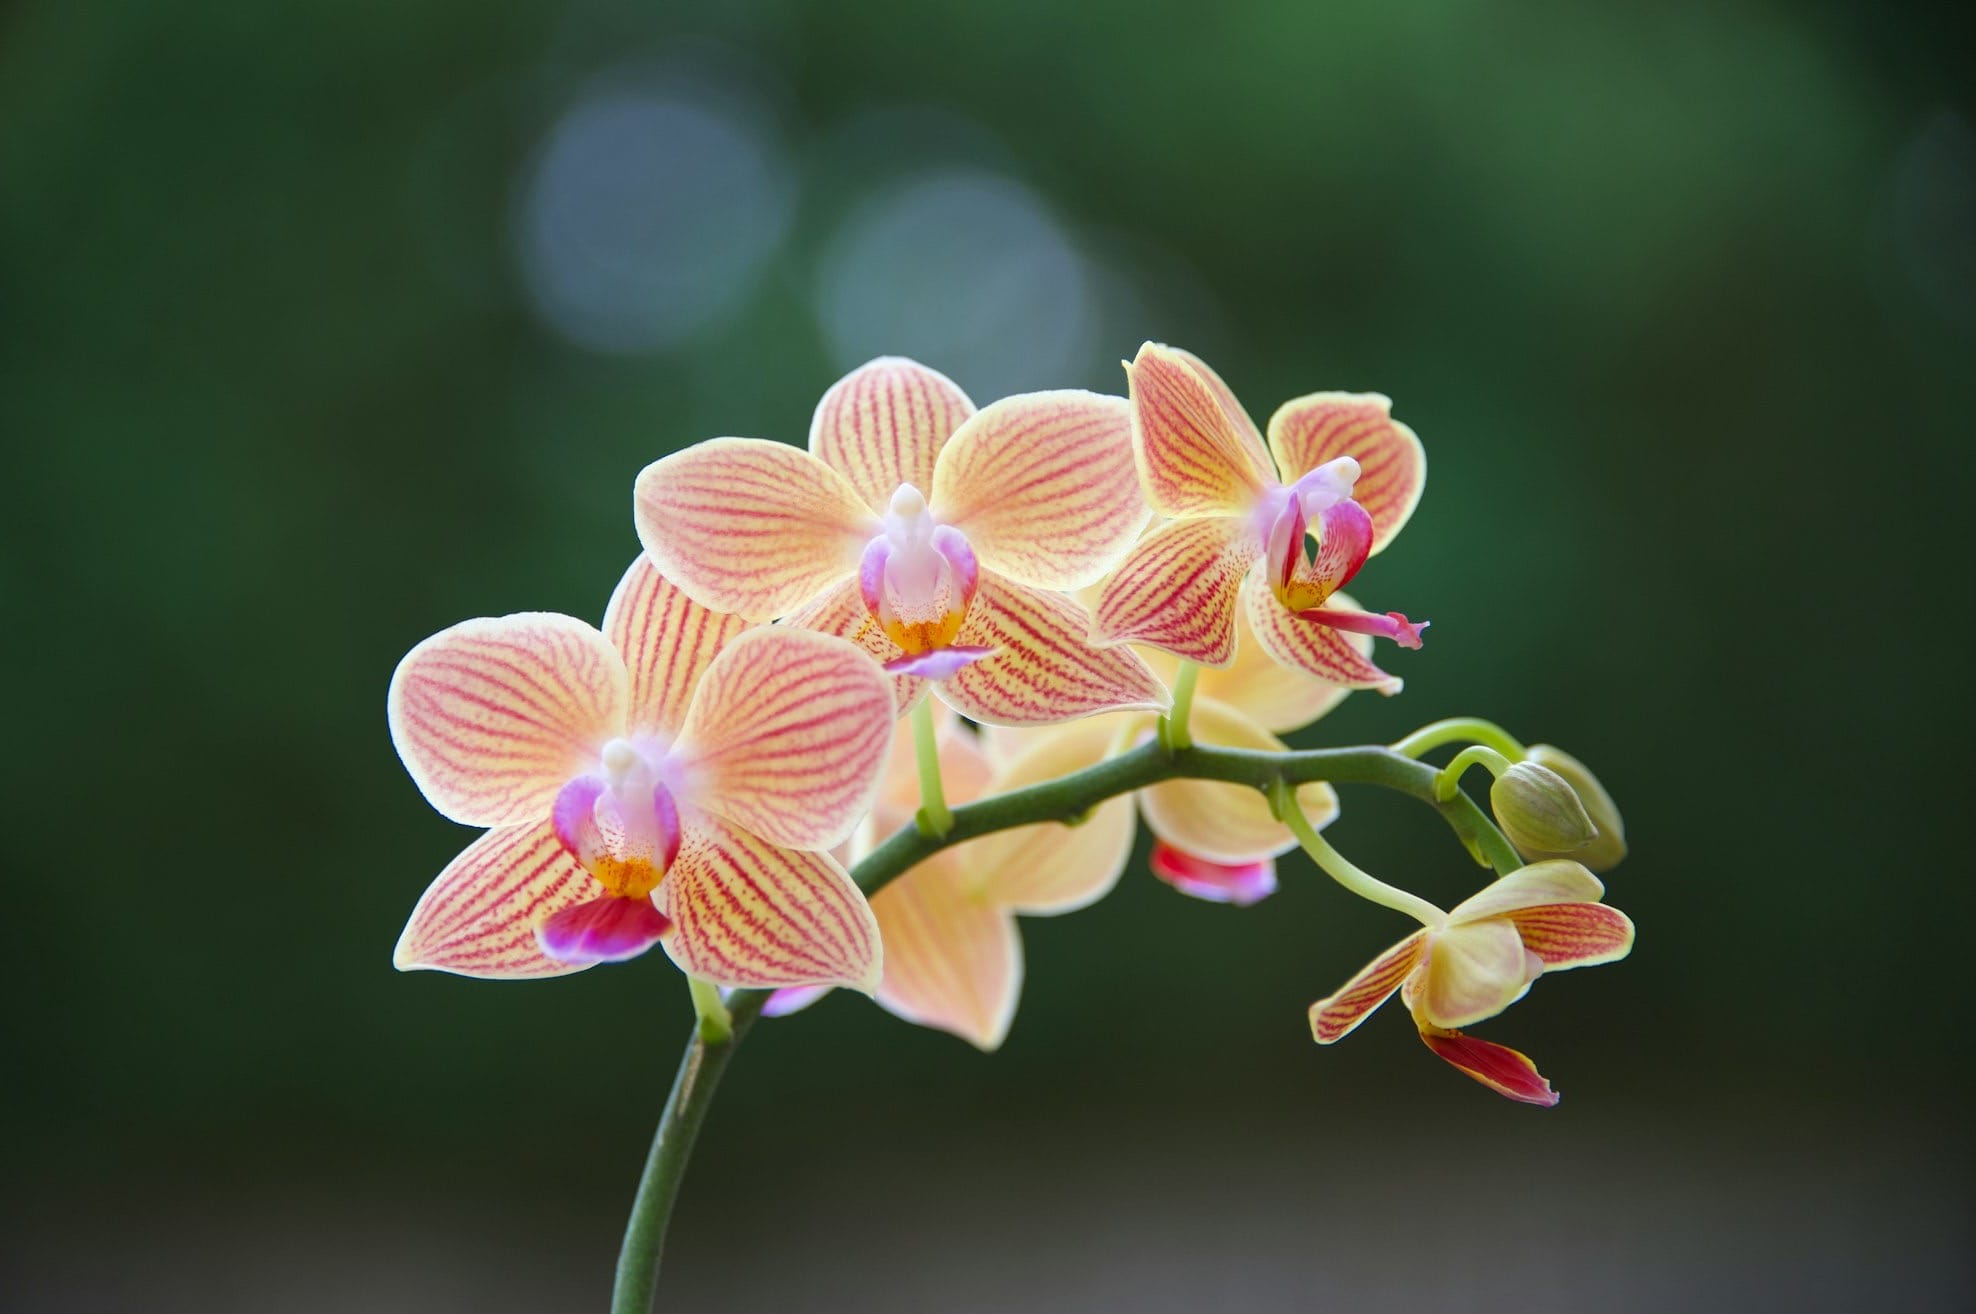 orchids in close up photography